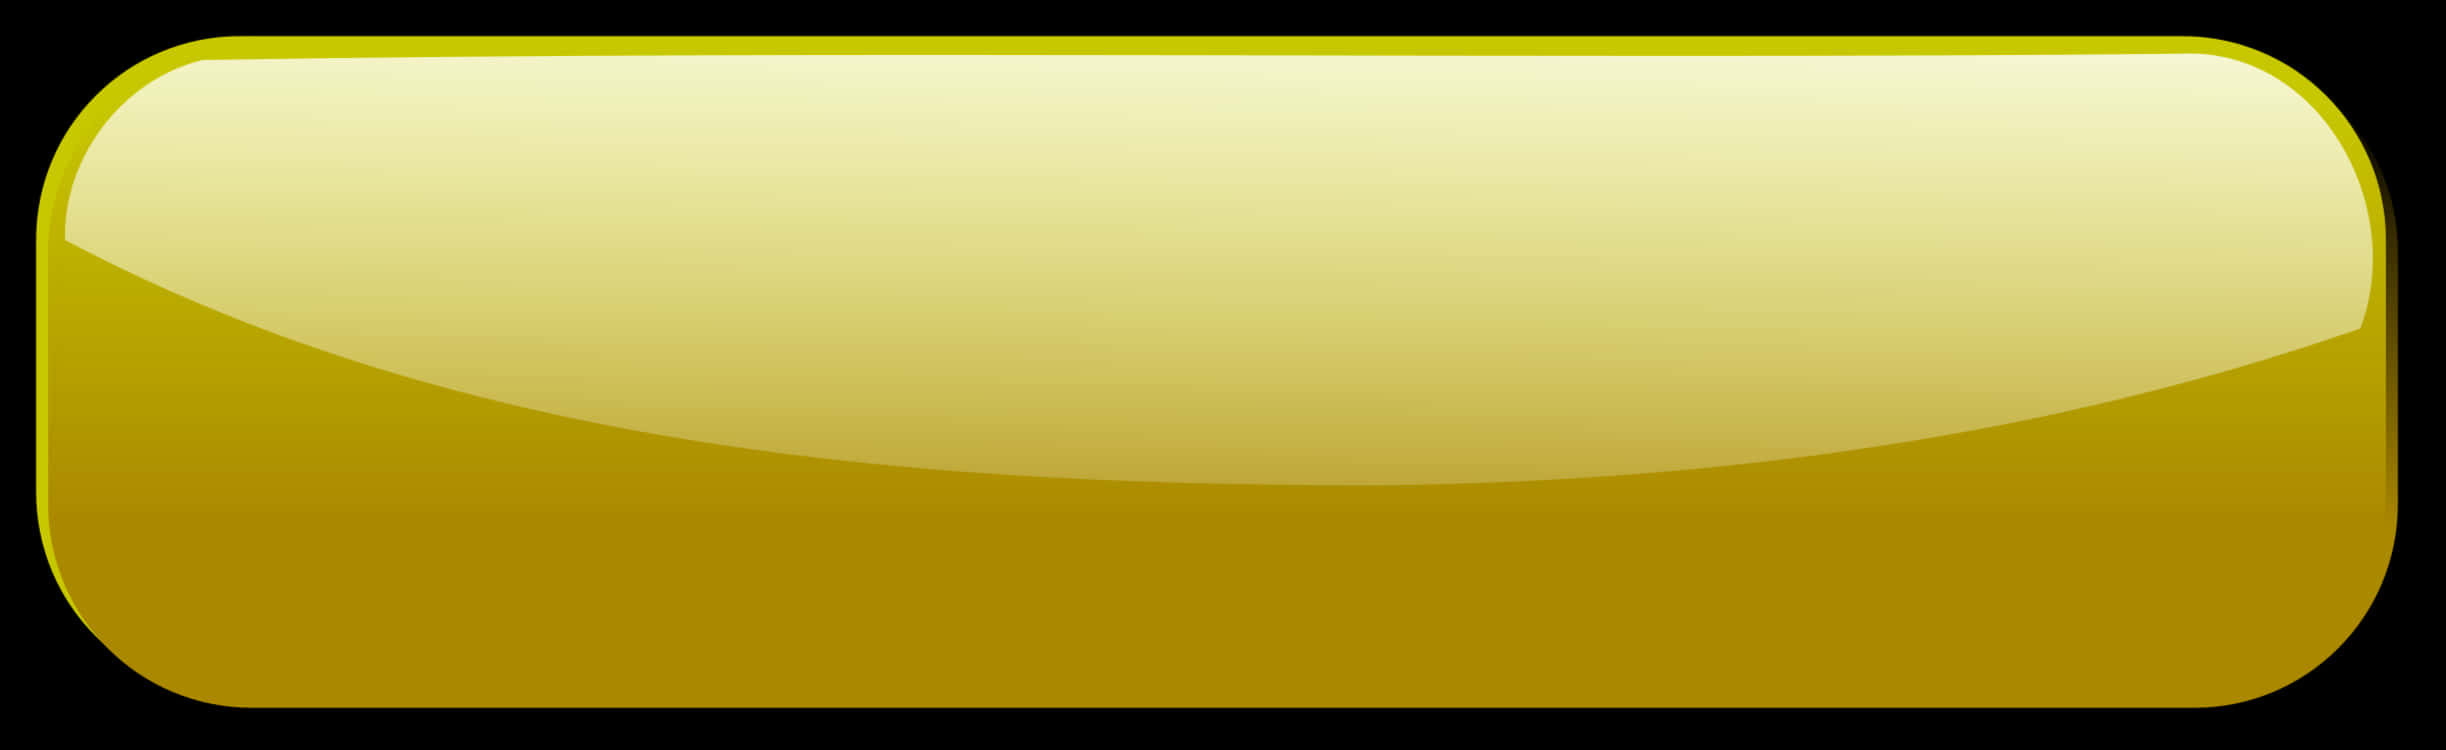 Golden Subscribe Button Blank PNG